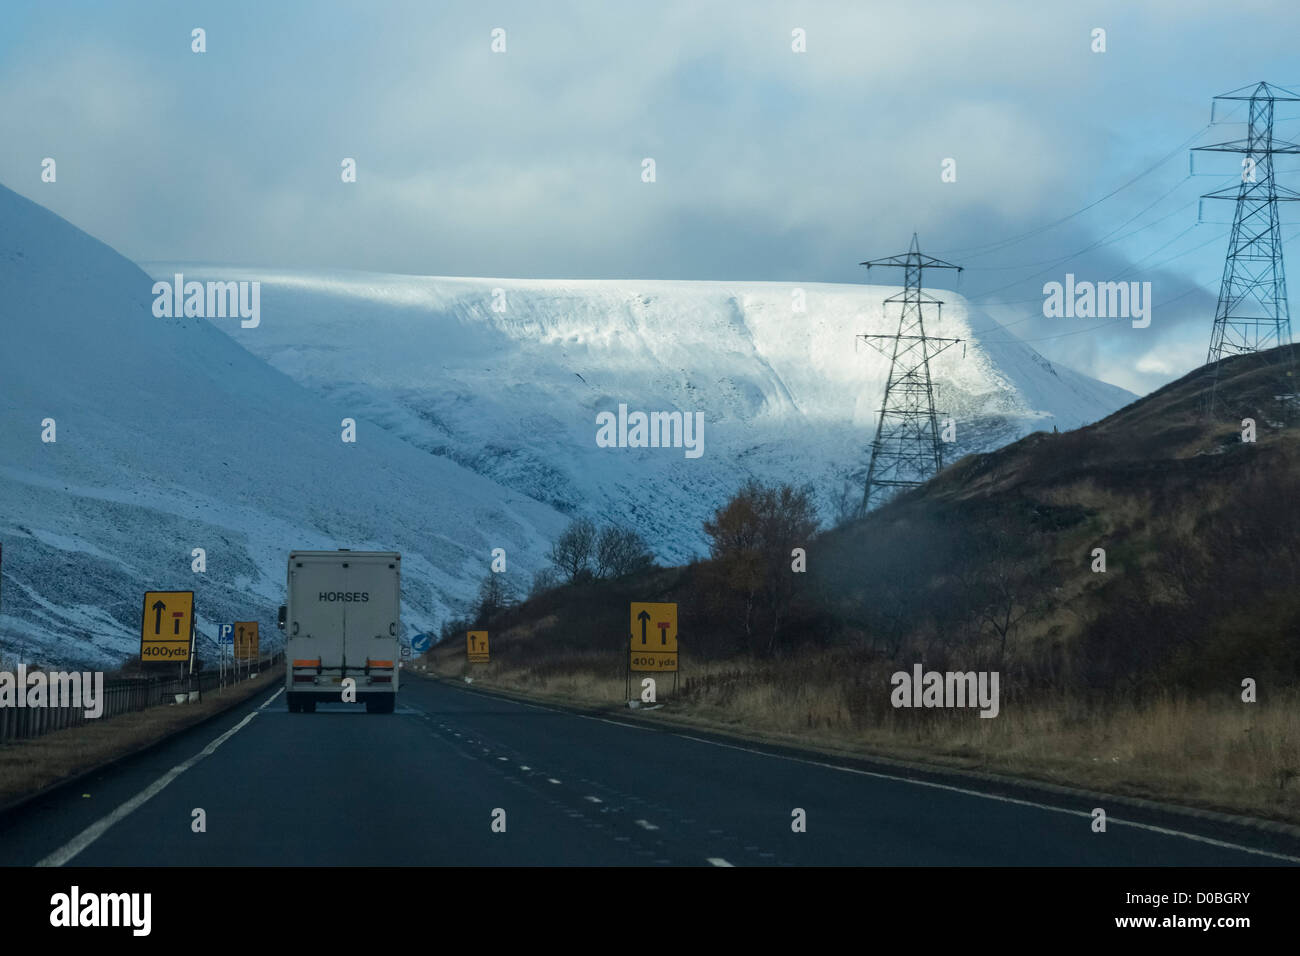 A wagon approaching road works on the A9 with mountains covered in snow in the background. Stock Photo